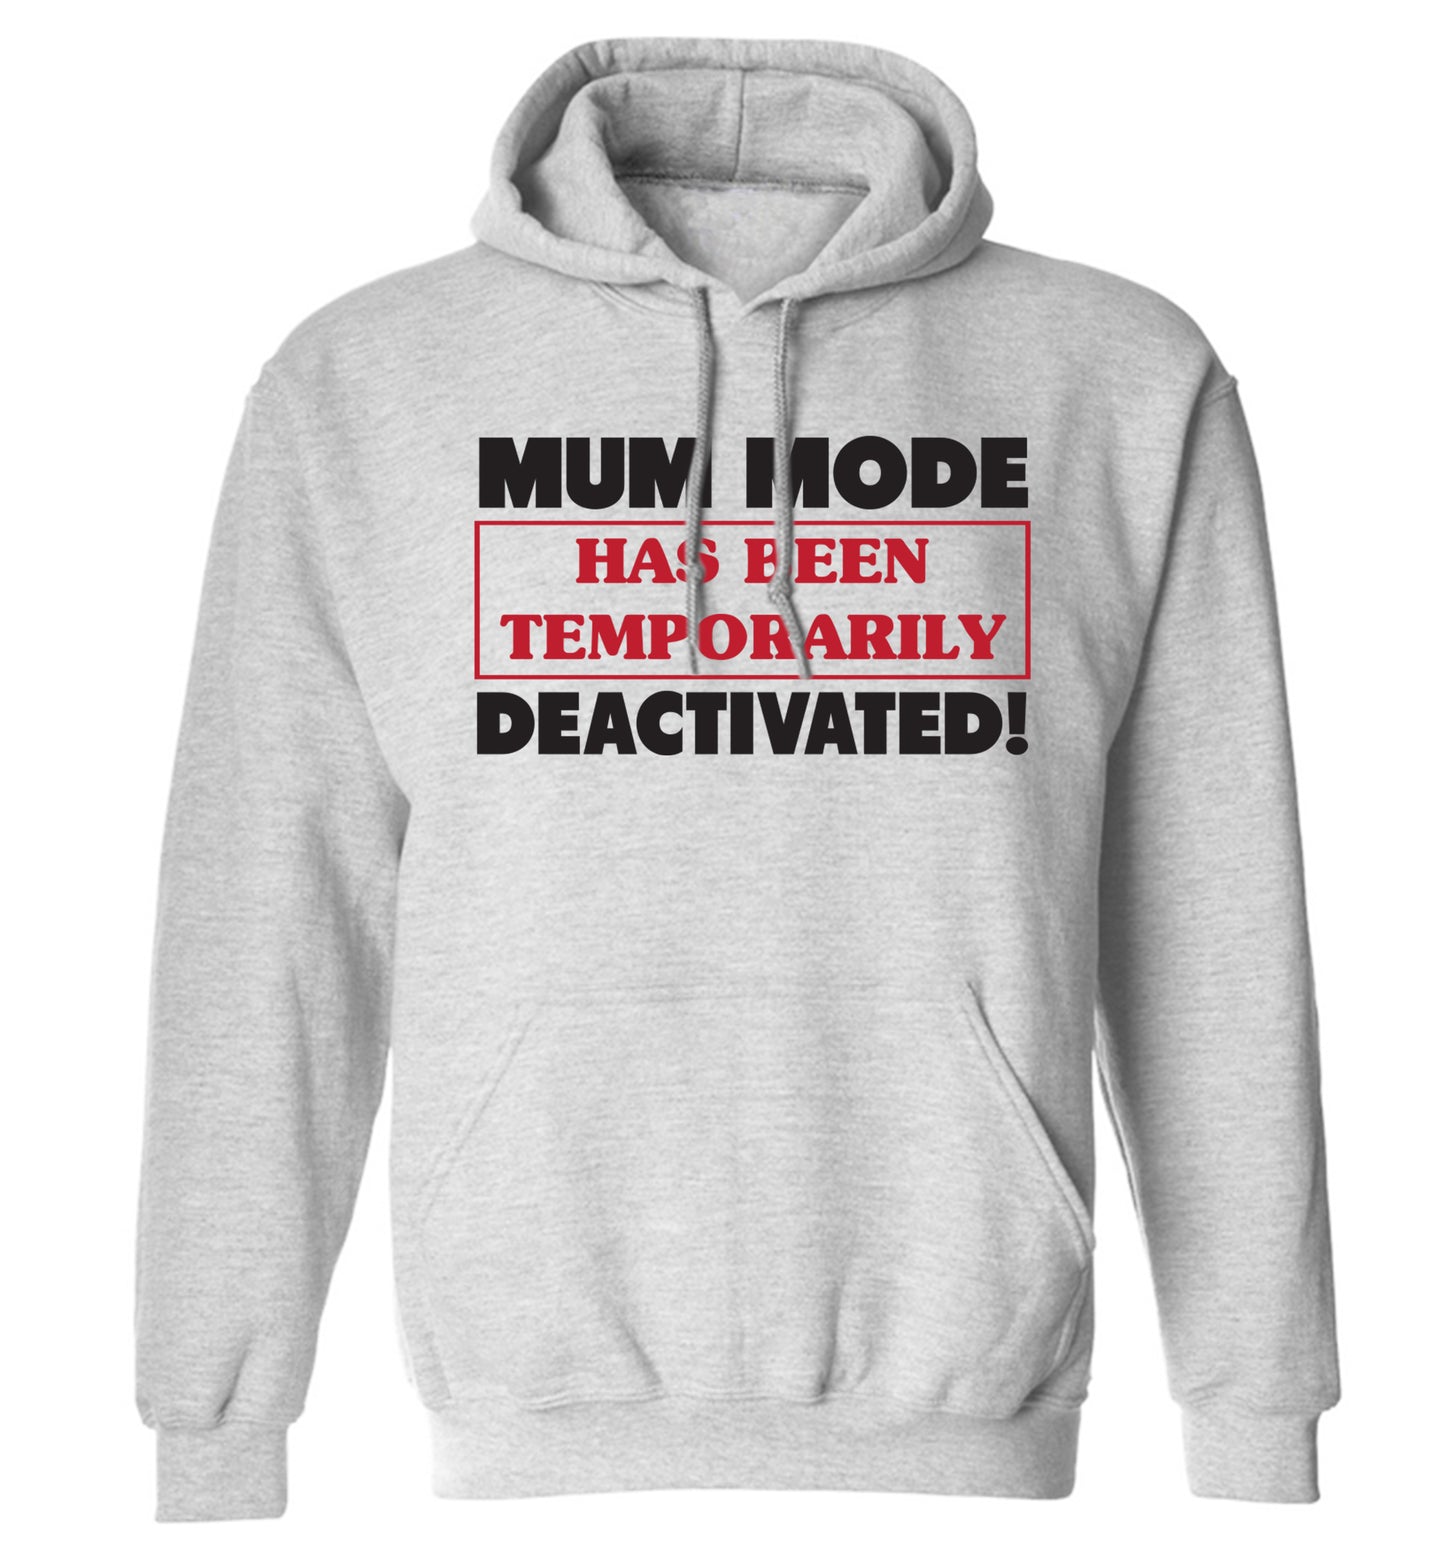 Mum mode has been temporarily deactivated! adults unisex grey hoodie 2XL